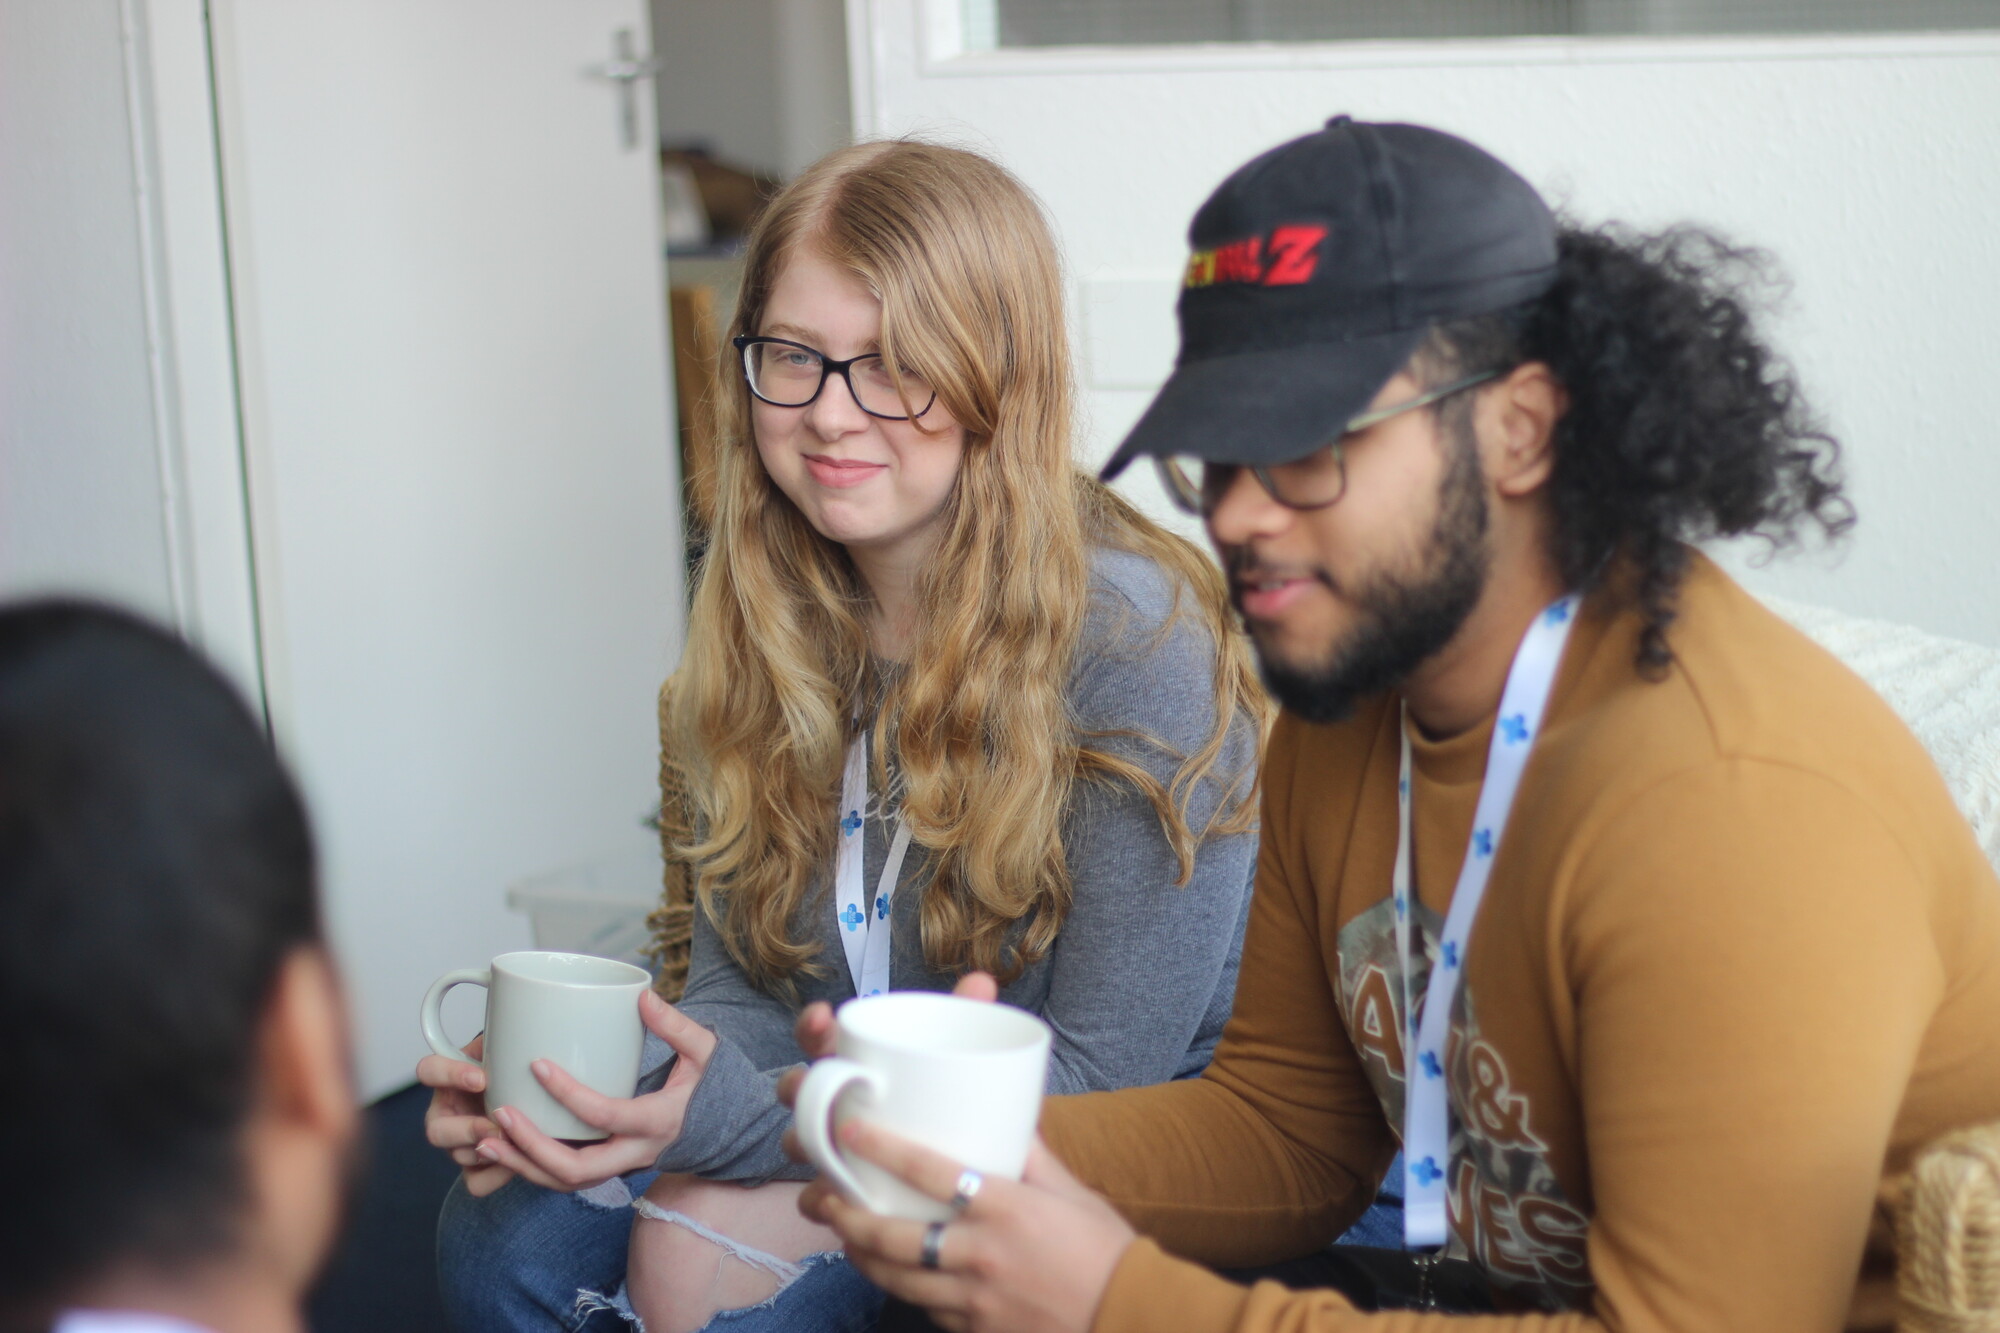 A young woman and young man sitting next to each other chatting over a cup of tea